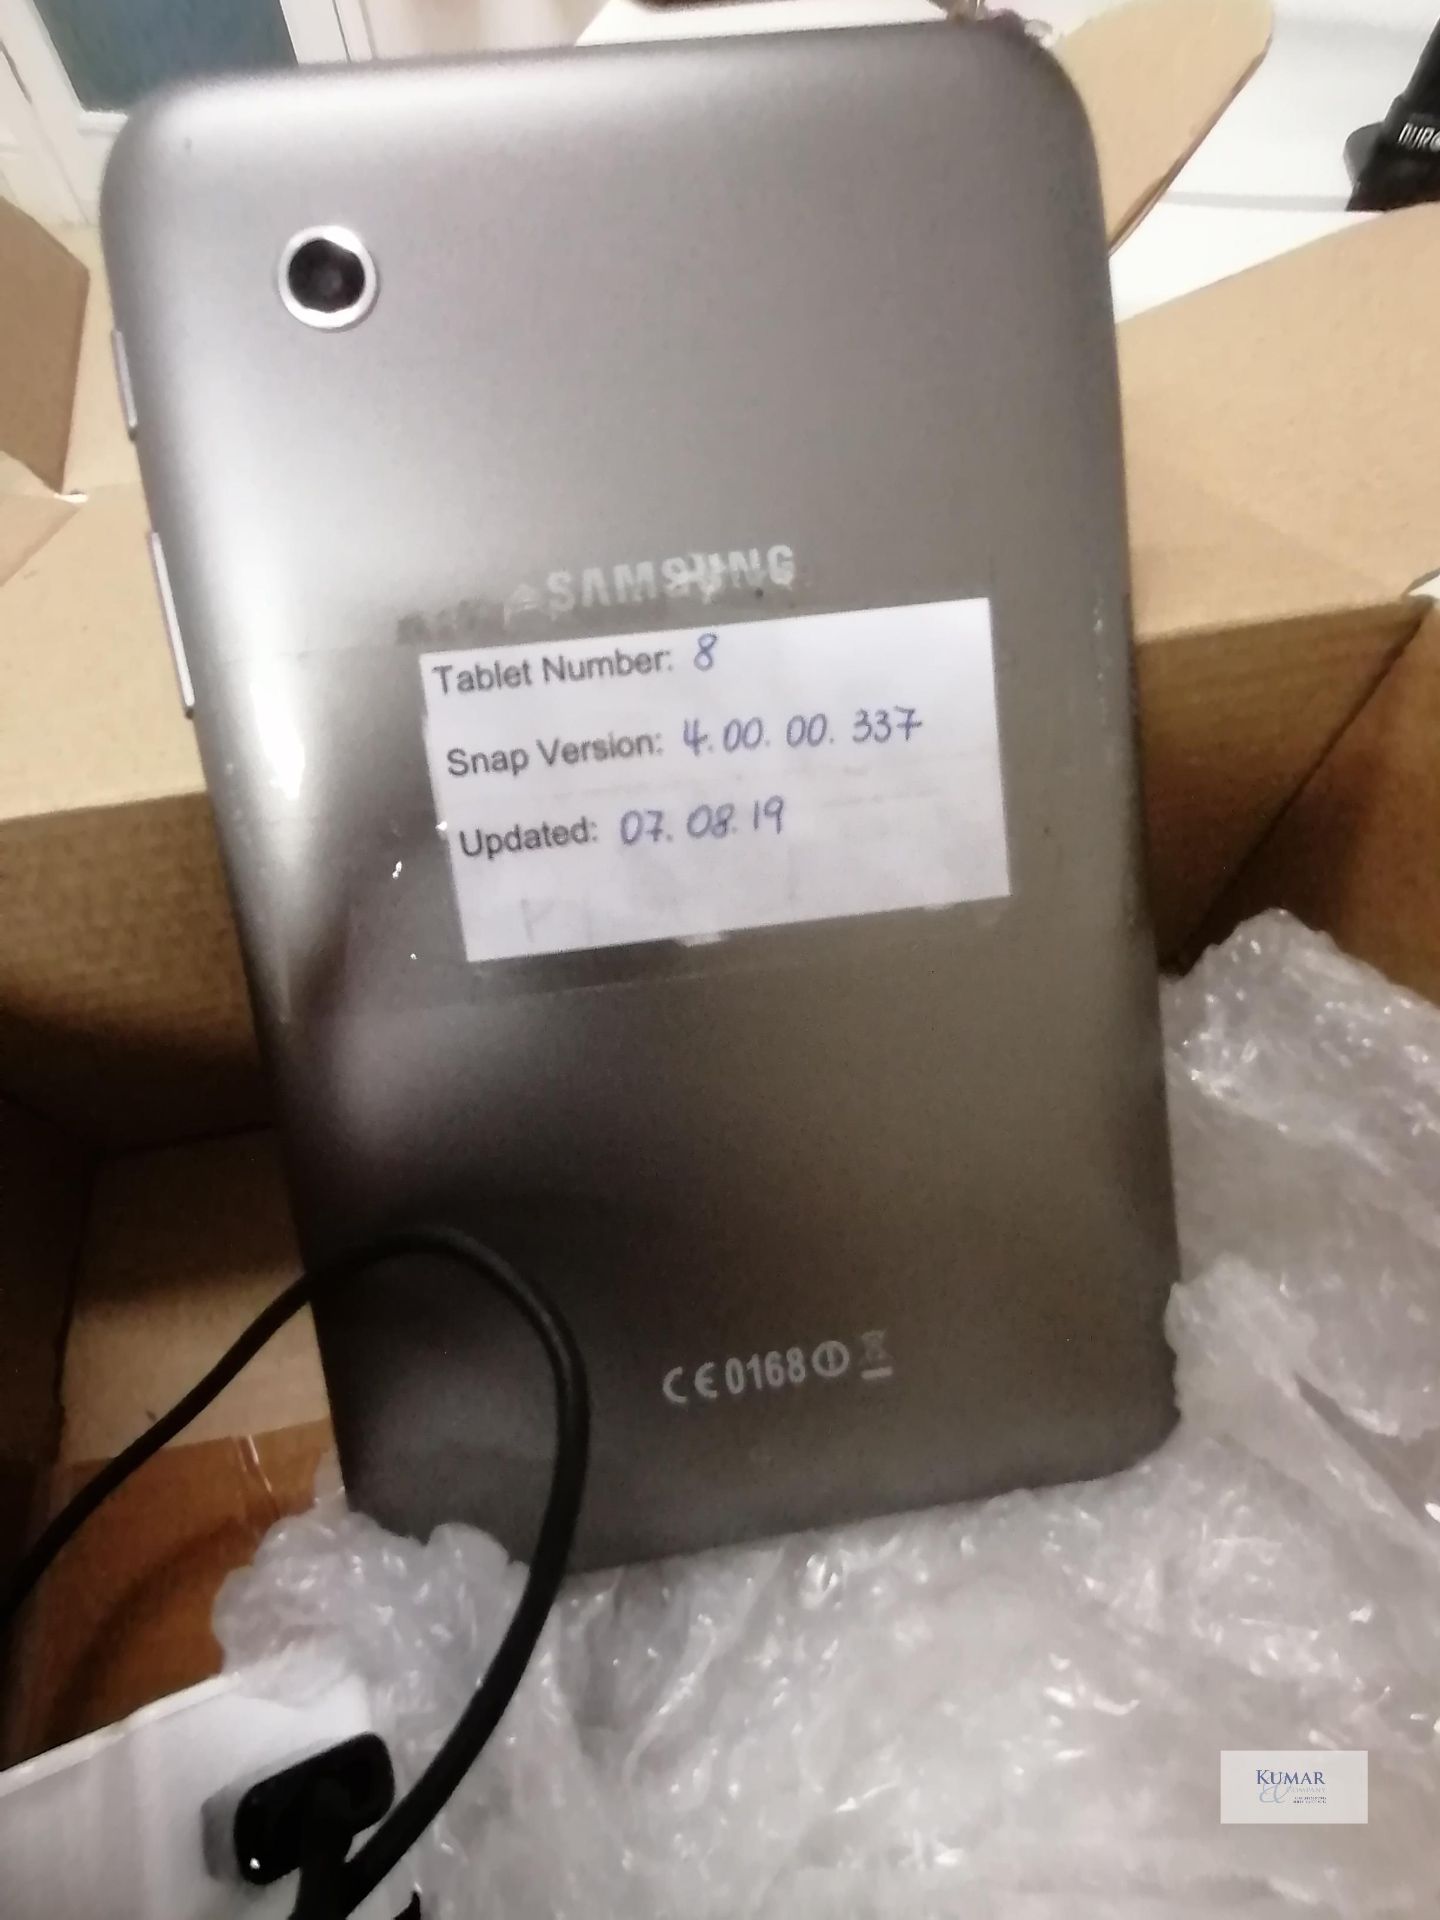 Samsung Tablet Model No GT-P3110 8GB Updated 07 08 2019 Cable and charger - Image 3 of 4